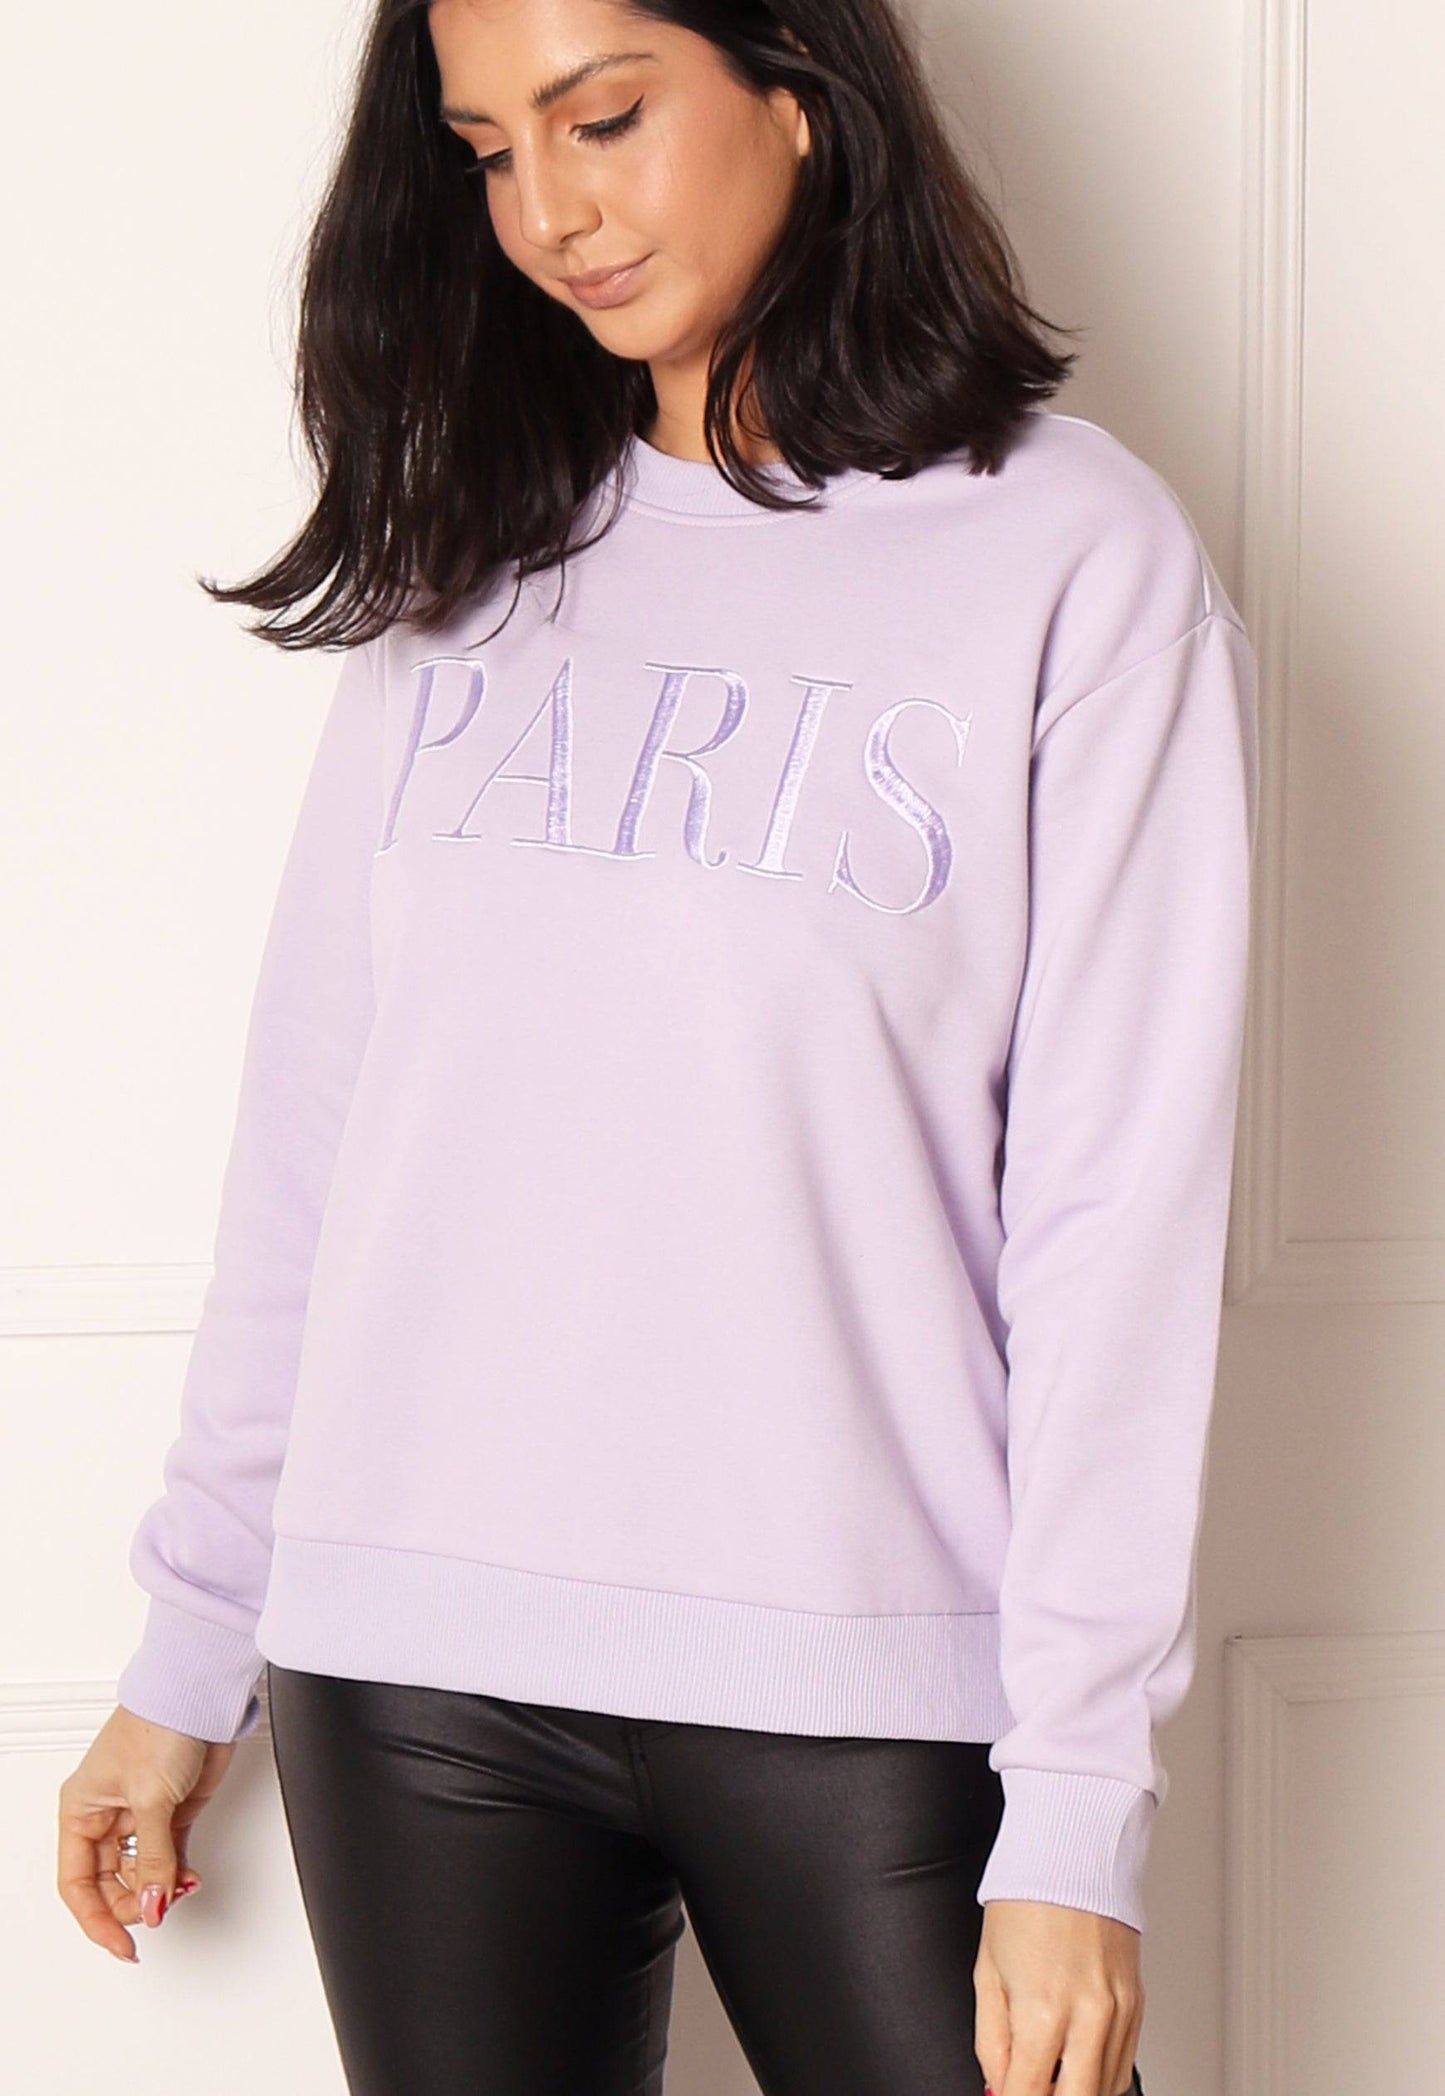 ONLY Paris Embroidered Slogan Sweatshirt in Lilac - One Nation Clothing